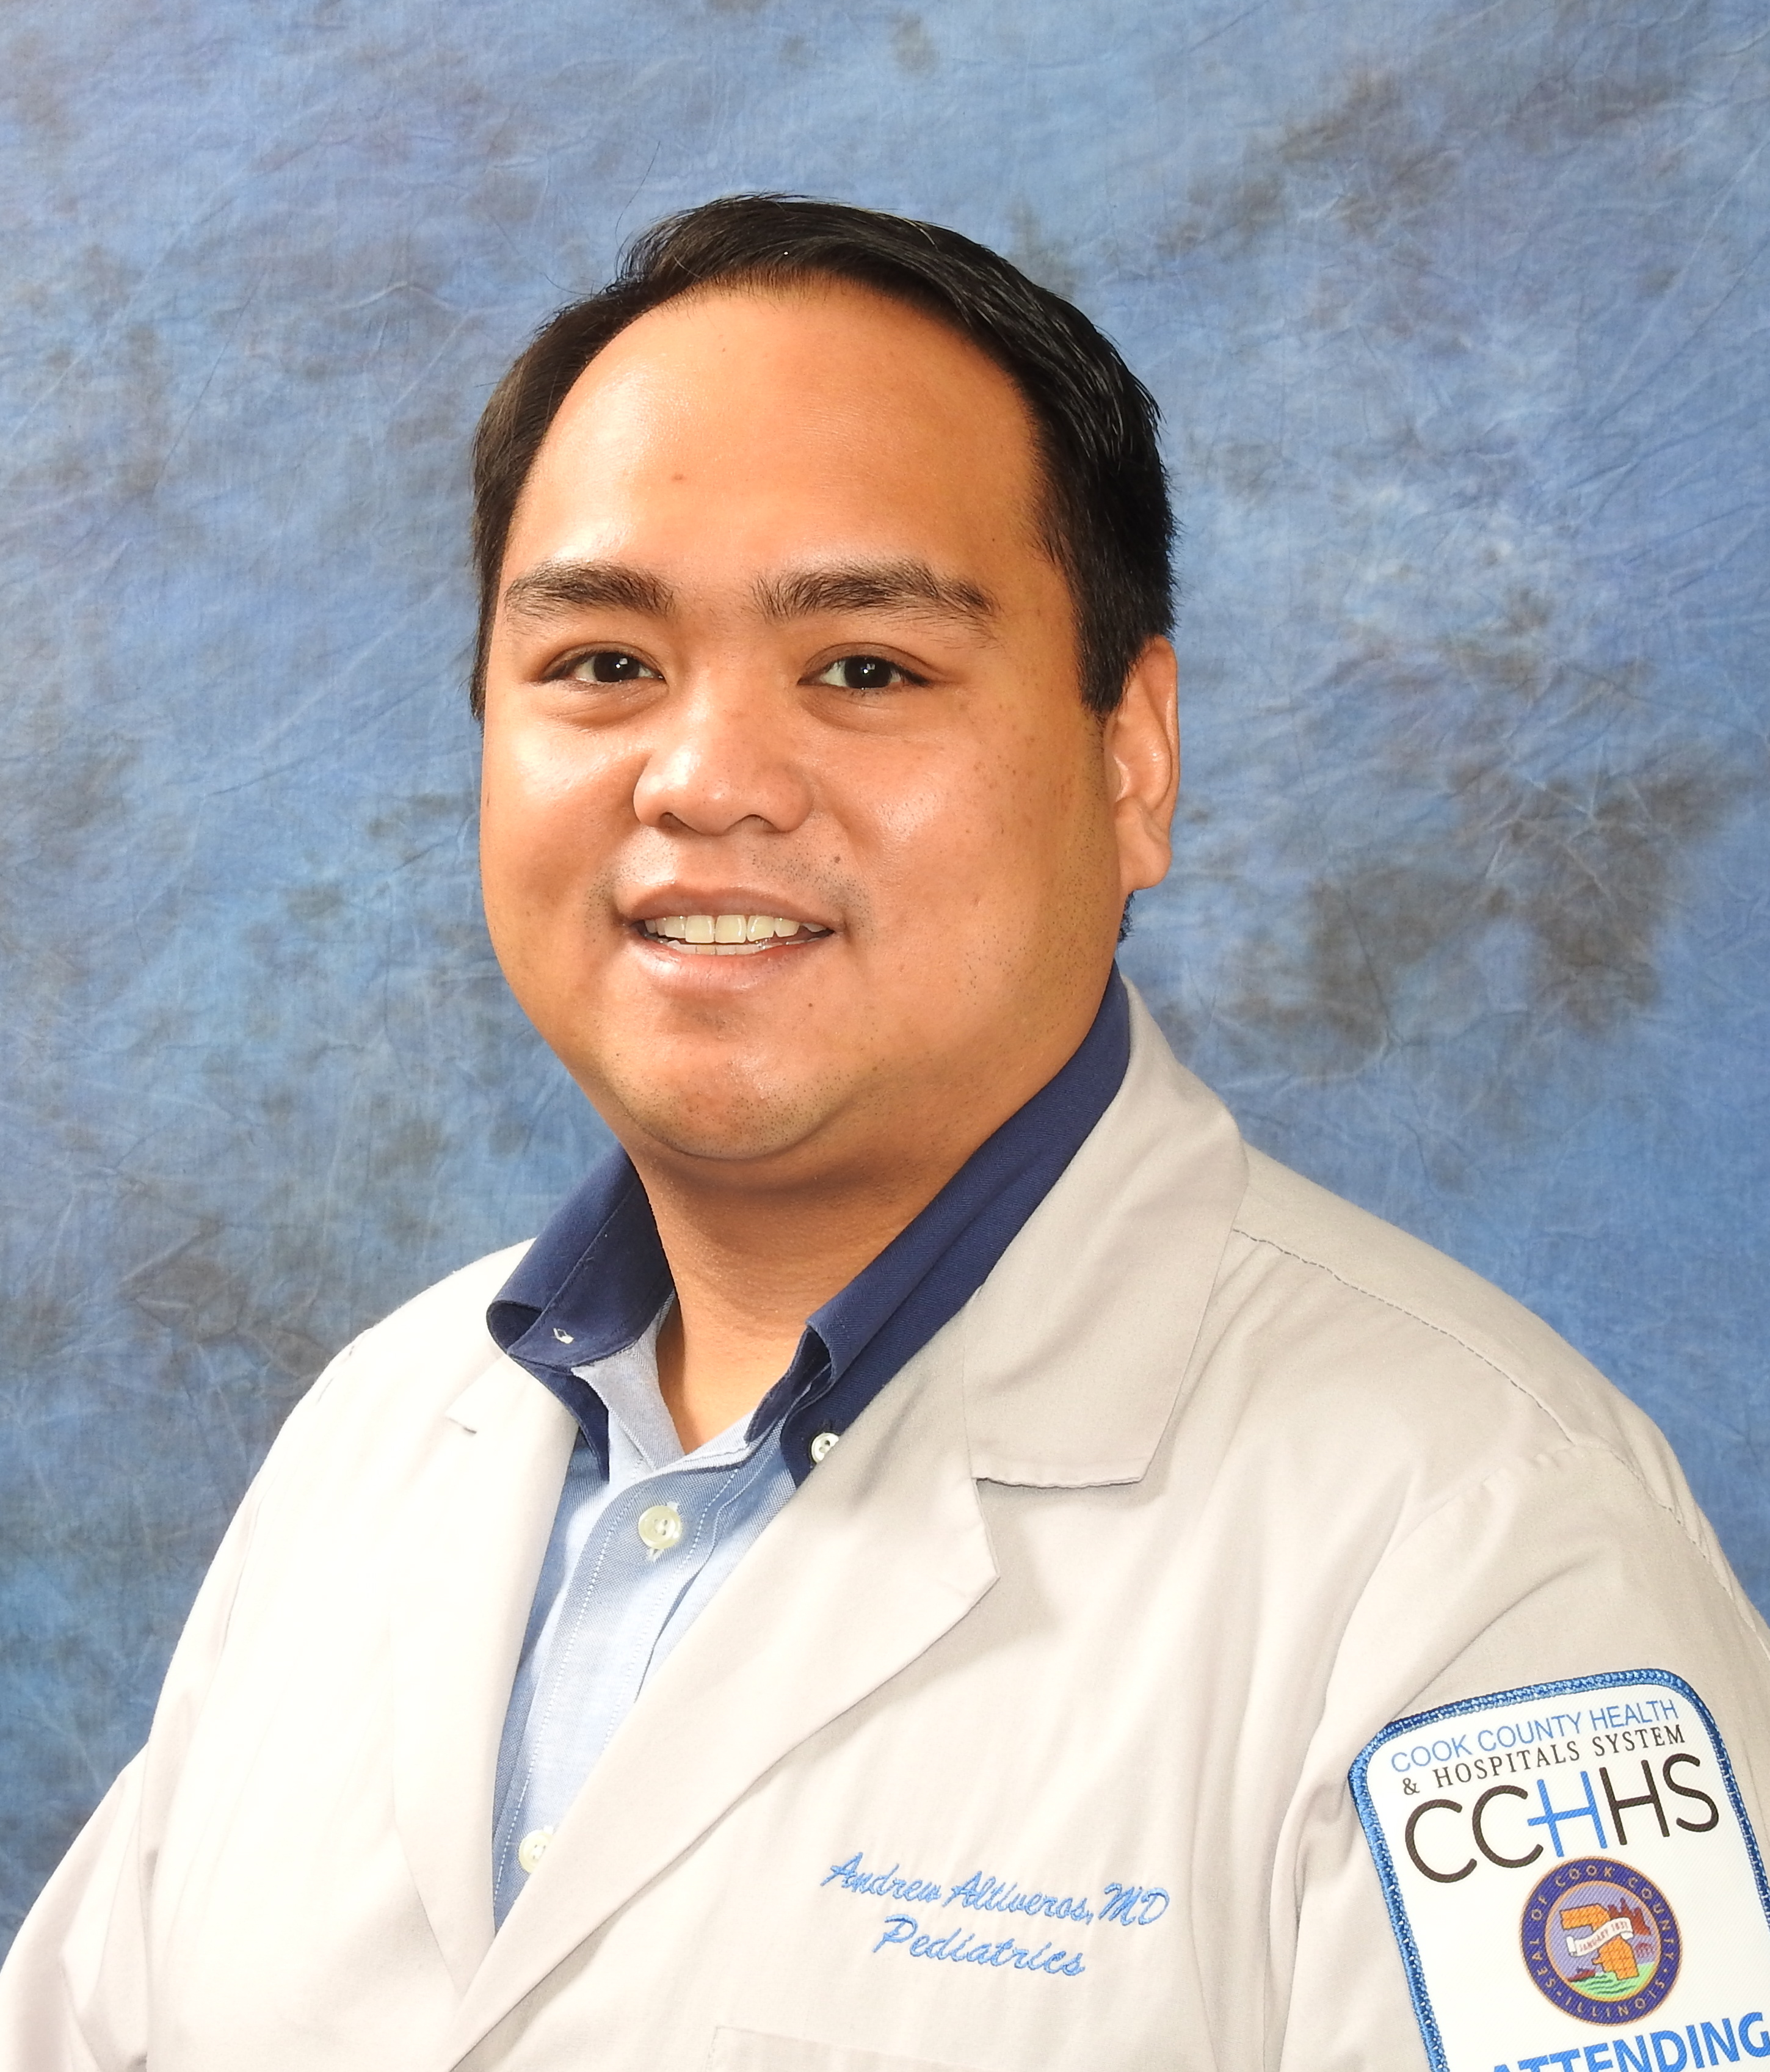 Andrew Altiveros, MD